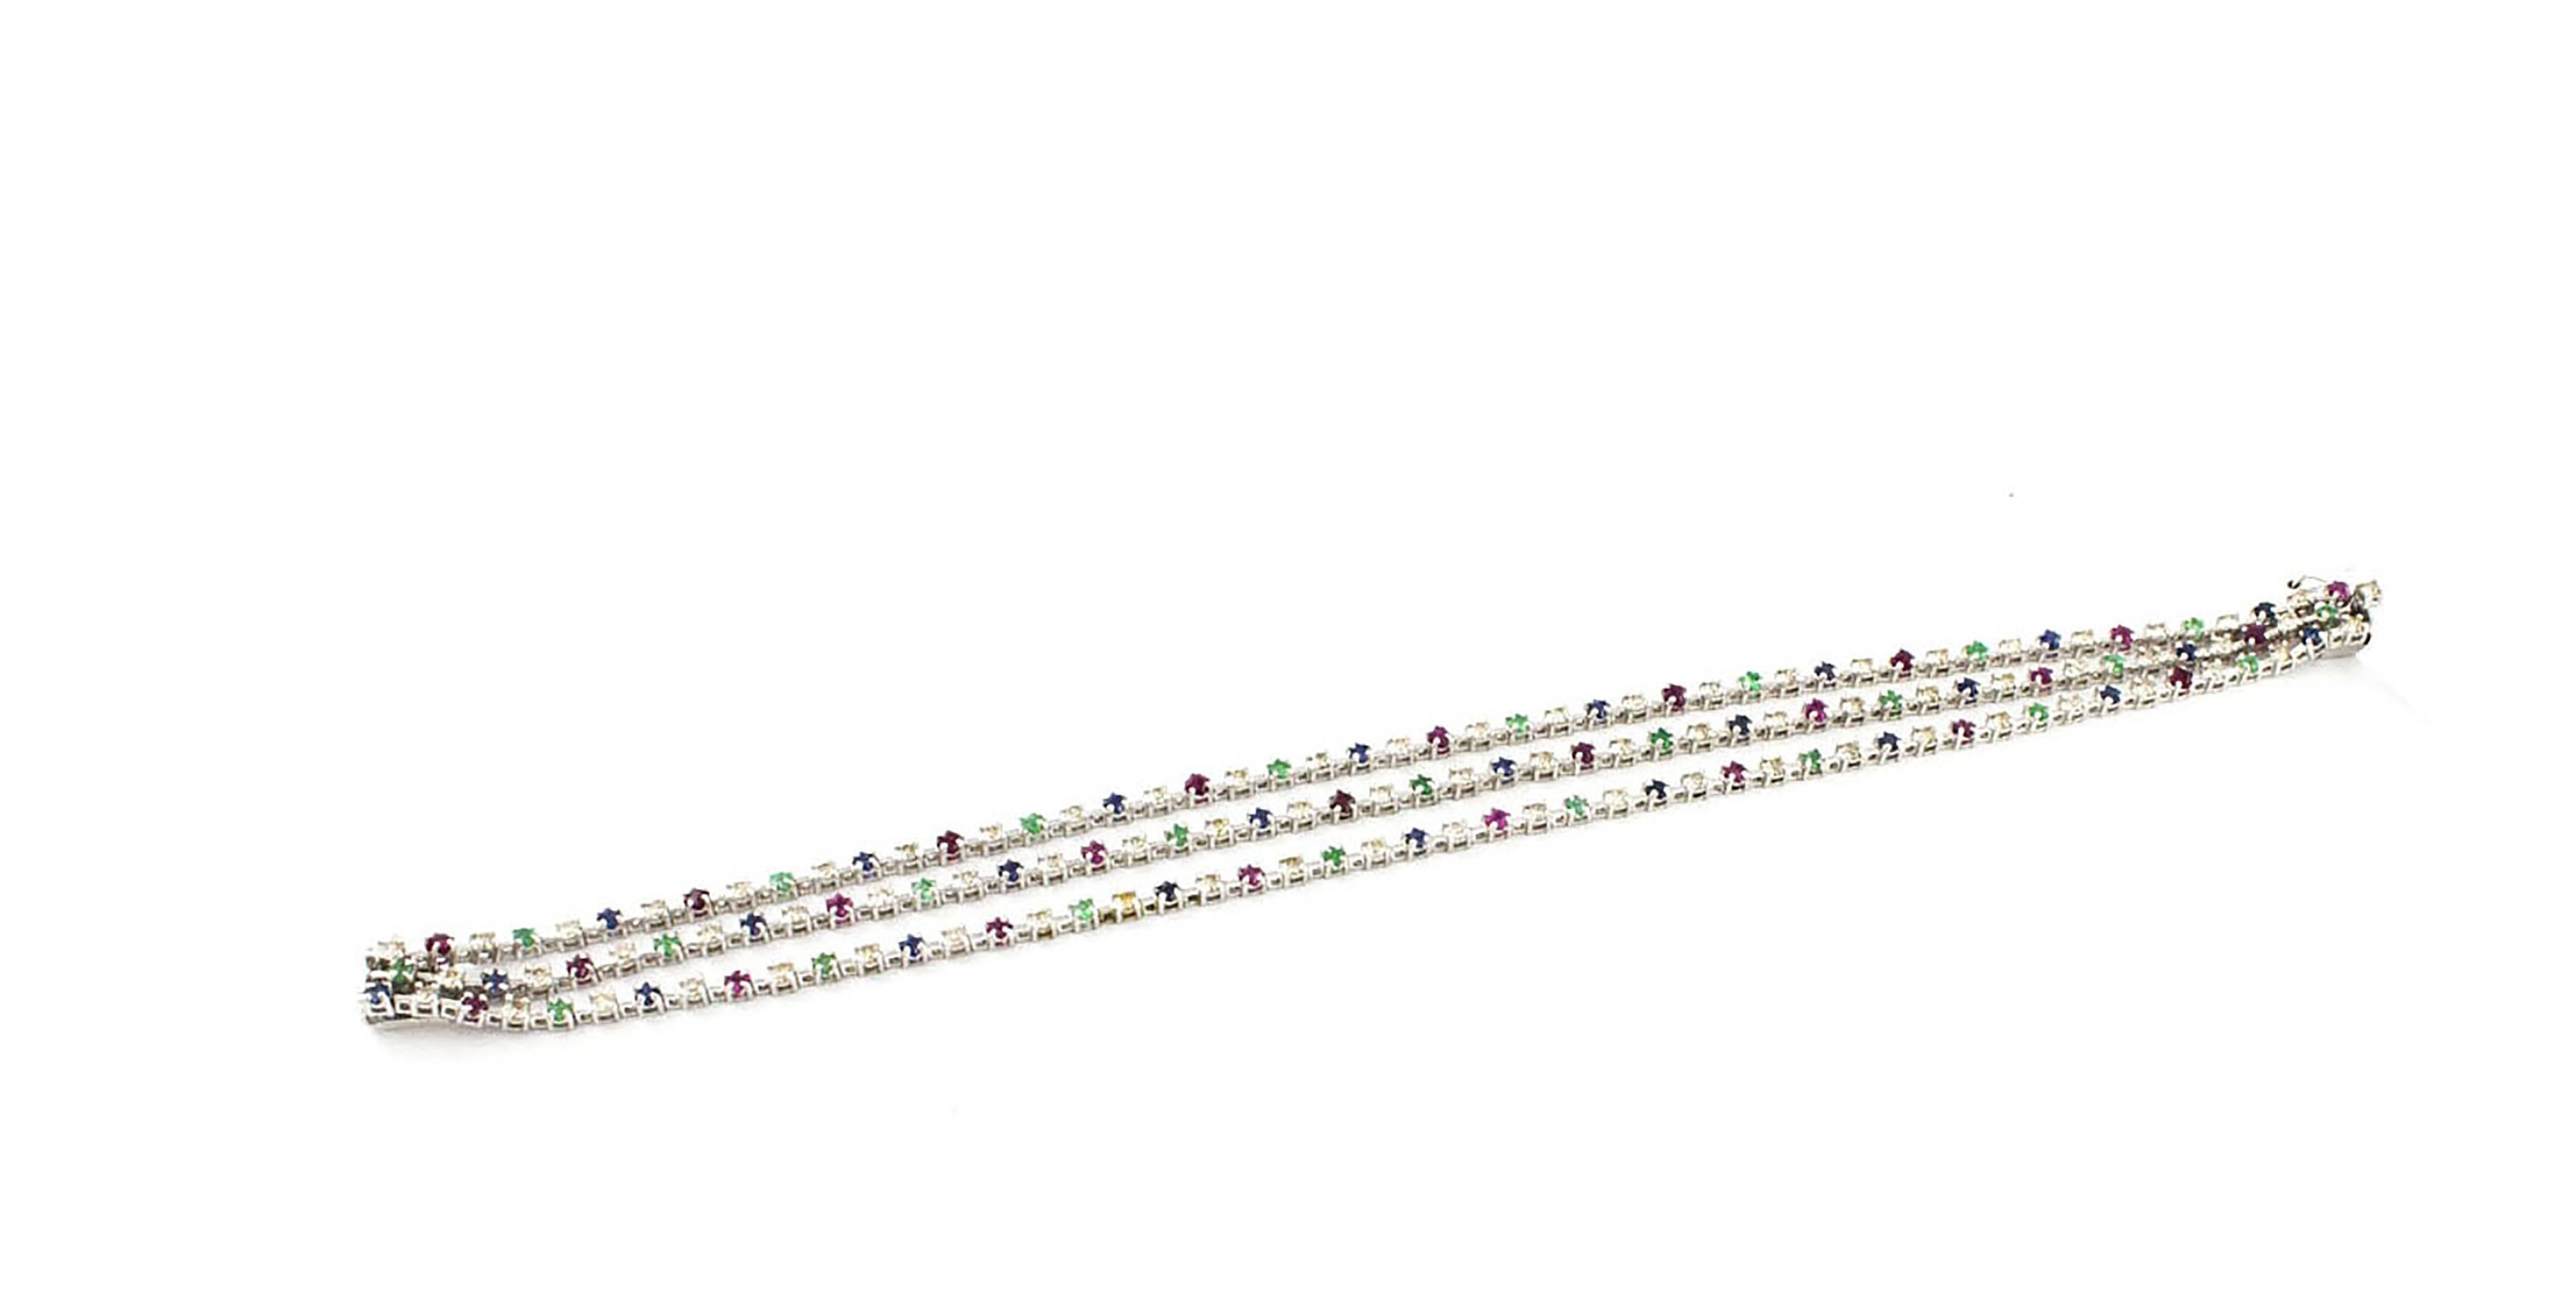 Elegant 14 kt white gold bracelet with 1.96 ct diamonds, sapphires, rubies and emeralds from ct 2.66, whose length is 18 cm and width 0.7 cm
Very special jewel for its three-wire design
Diamonds 1.96 ct
Rubies and emerald sapphires 2.66 ct
Total